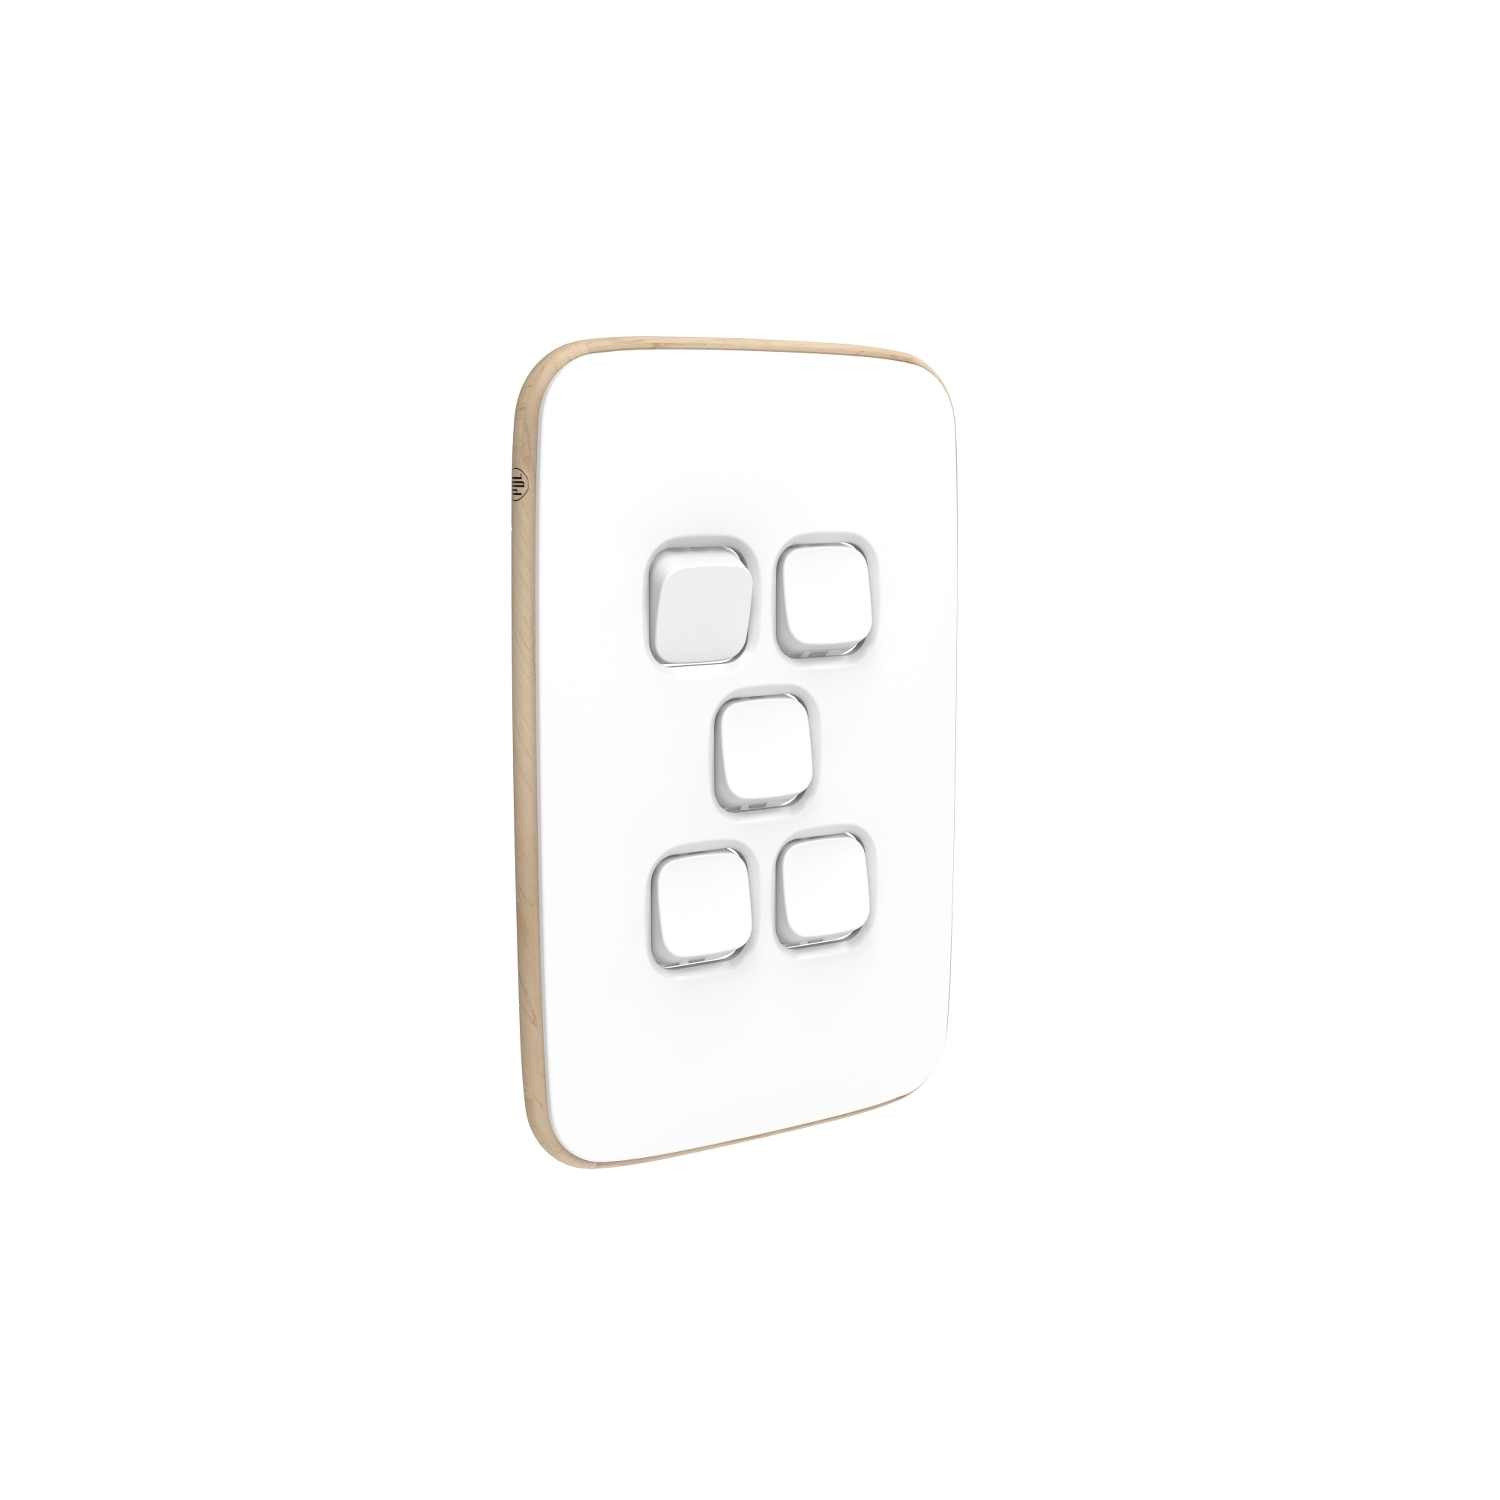 PDL Iconic Essence, cover frame, 5 switches, vertical - Arctic White